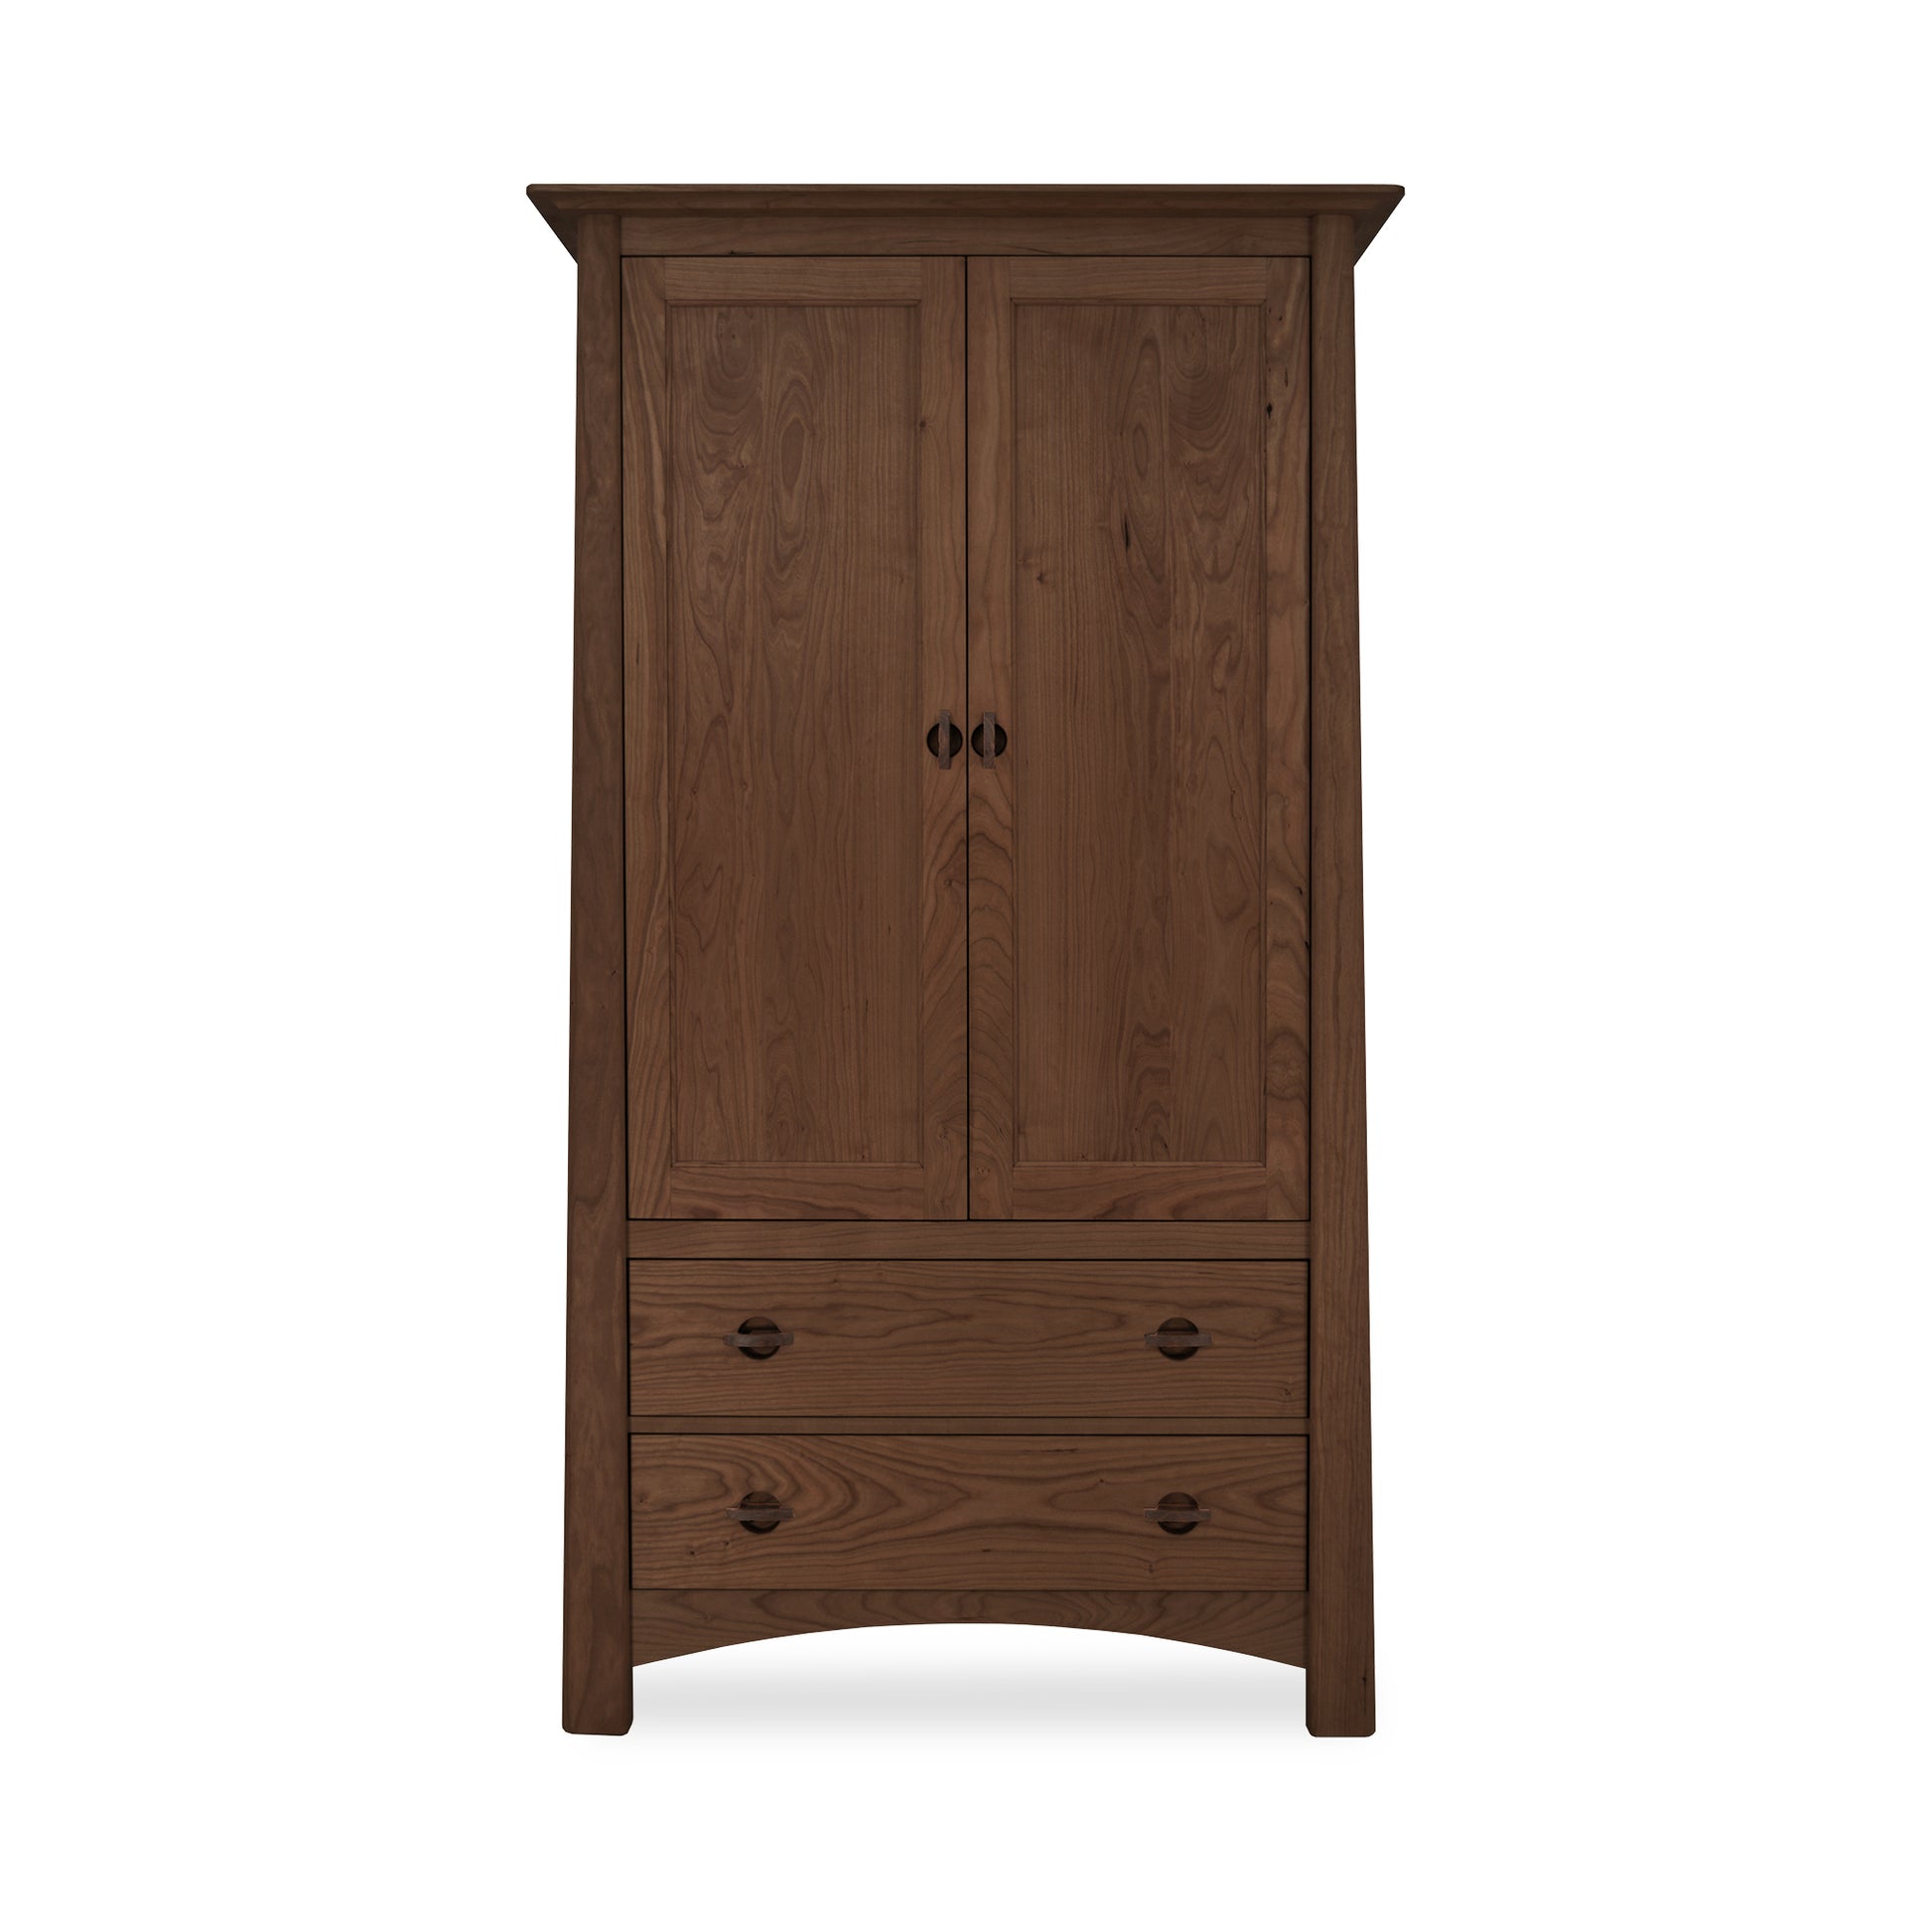 A dark brown Cherry Moon Armoire, showcasing Maple Corner Woodworks craftsmanship, with two doors and a drawer at the bottom, set against a plain white background. The wardrobe features a simple, classic design with rounded handles on the.